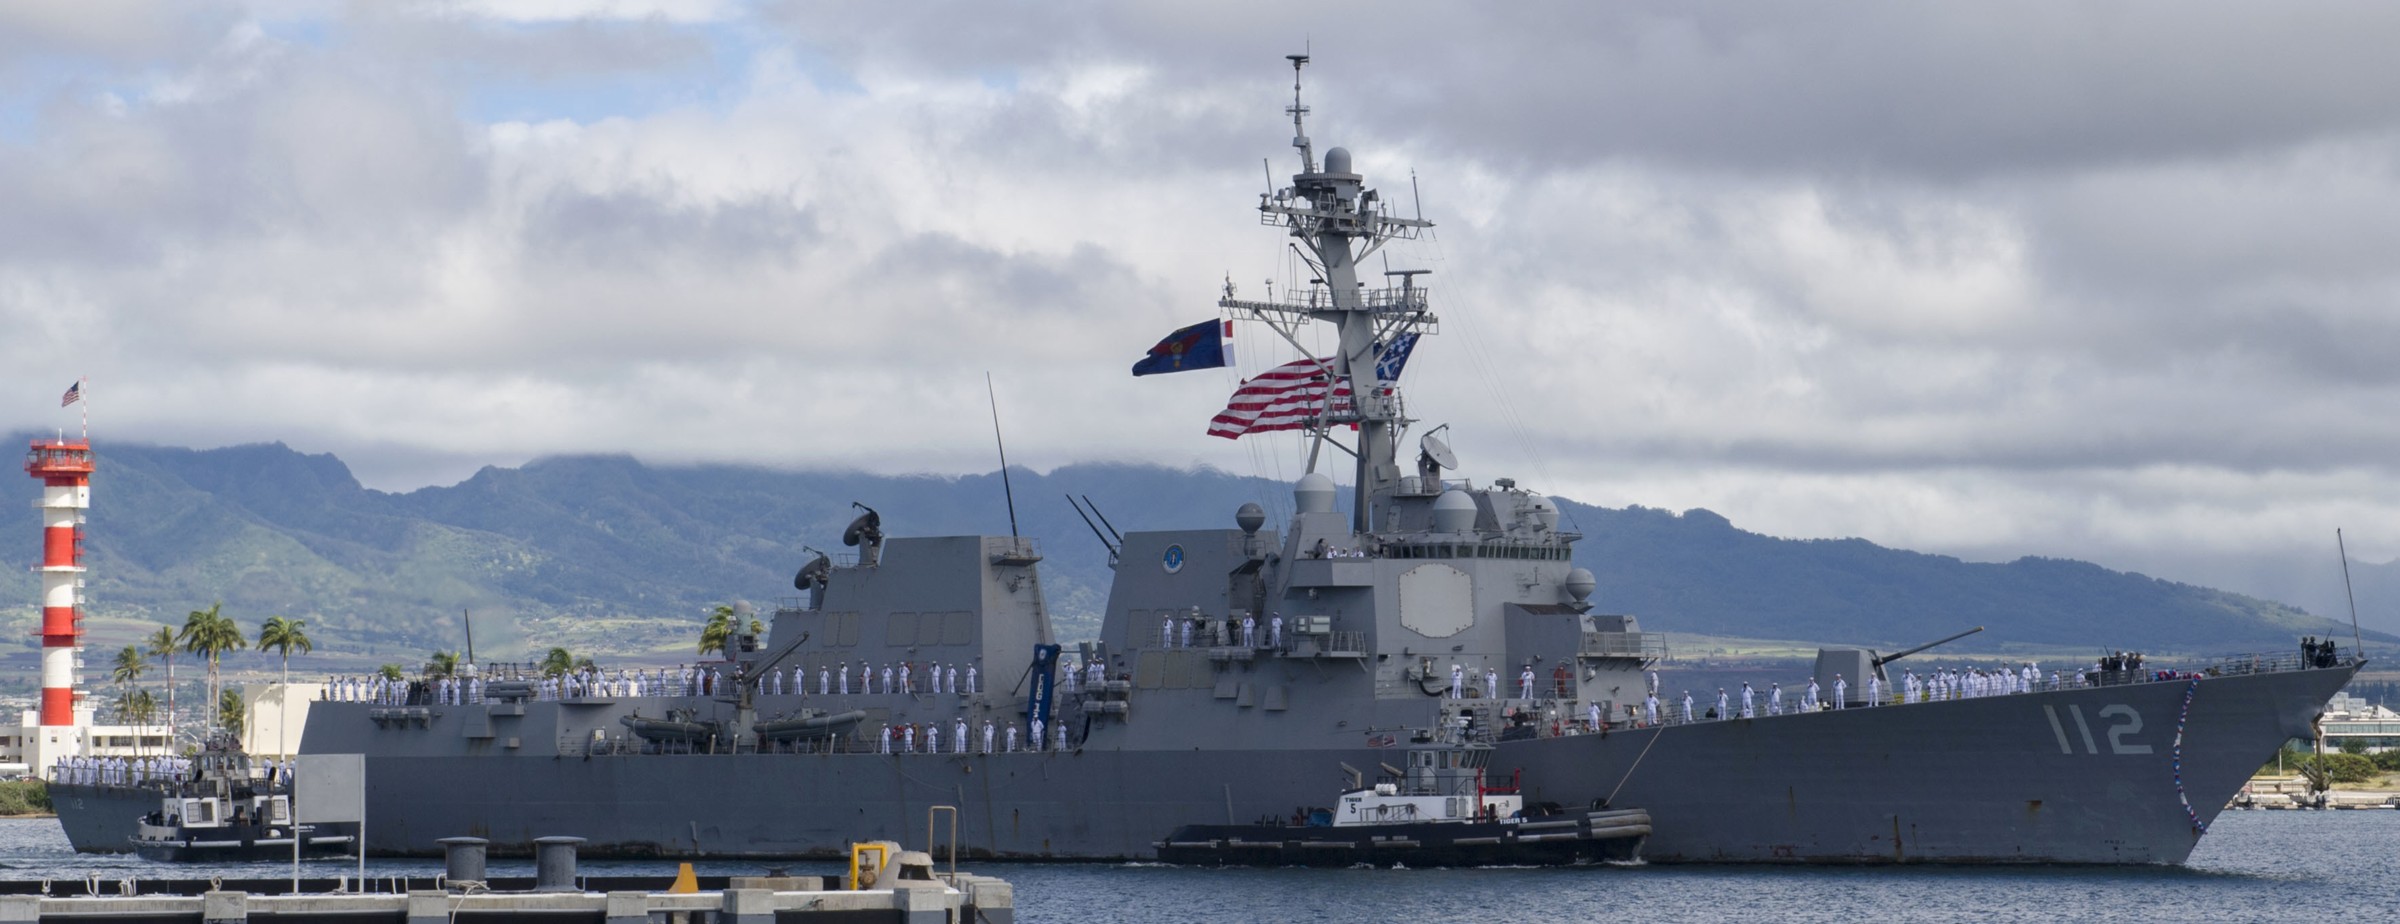 ddg-112 uss michael murphy arleigh burke class guided missile destroyer aegis us navy 38